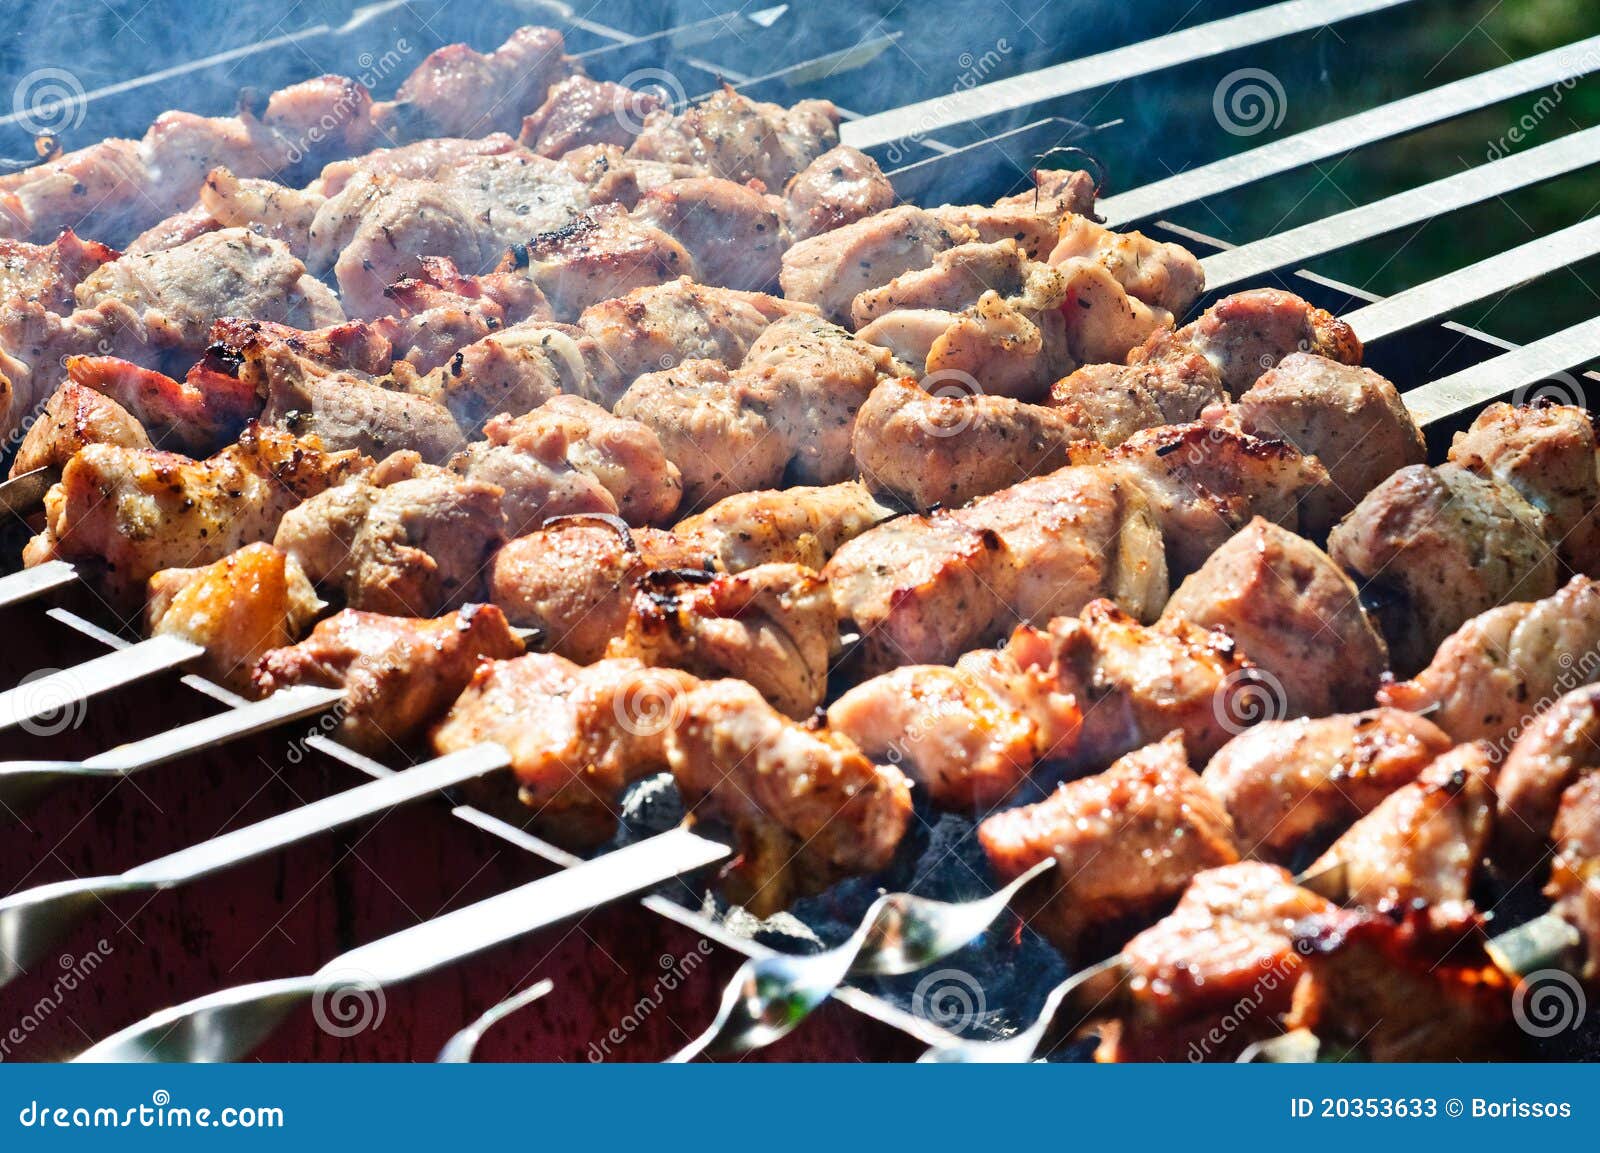 Fried meat on the grill stock image. Image of picnic - 20353633